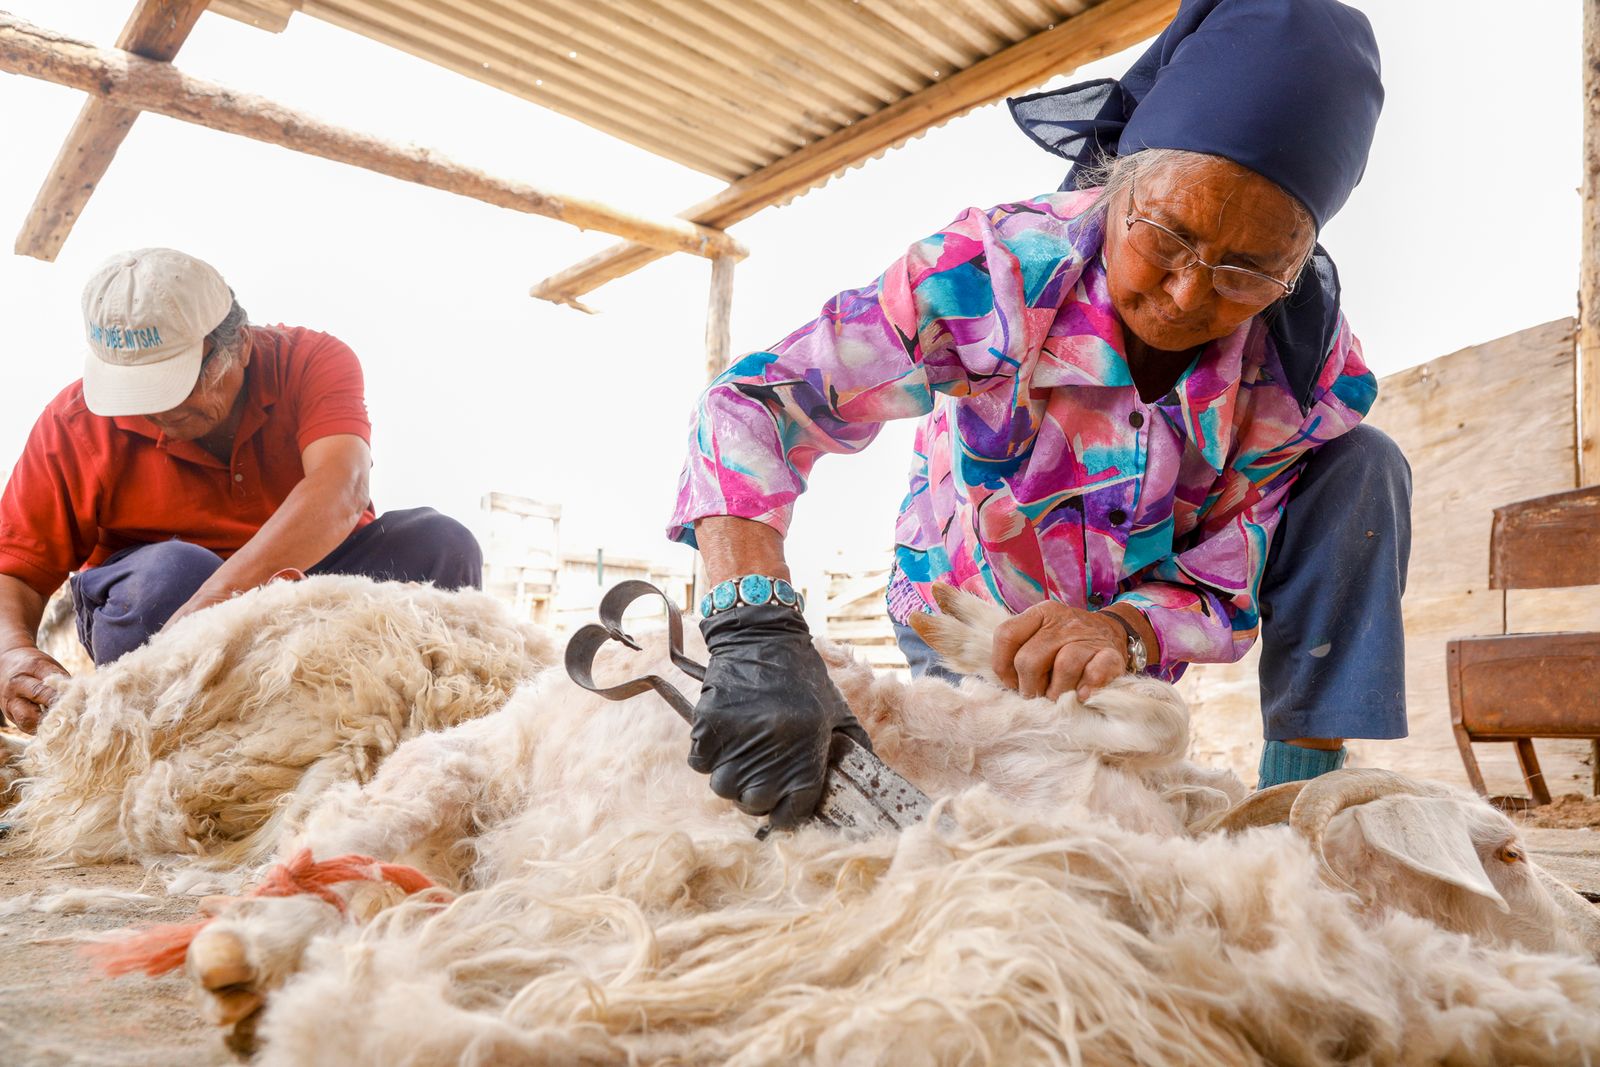 © Julien McRoberts - Native elders shearing the sheep by hand with shears. There is no electricity at the camp.